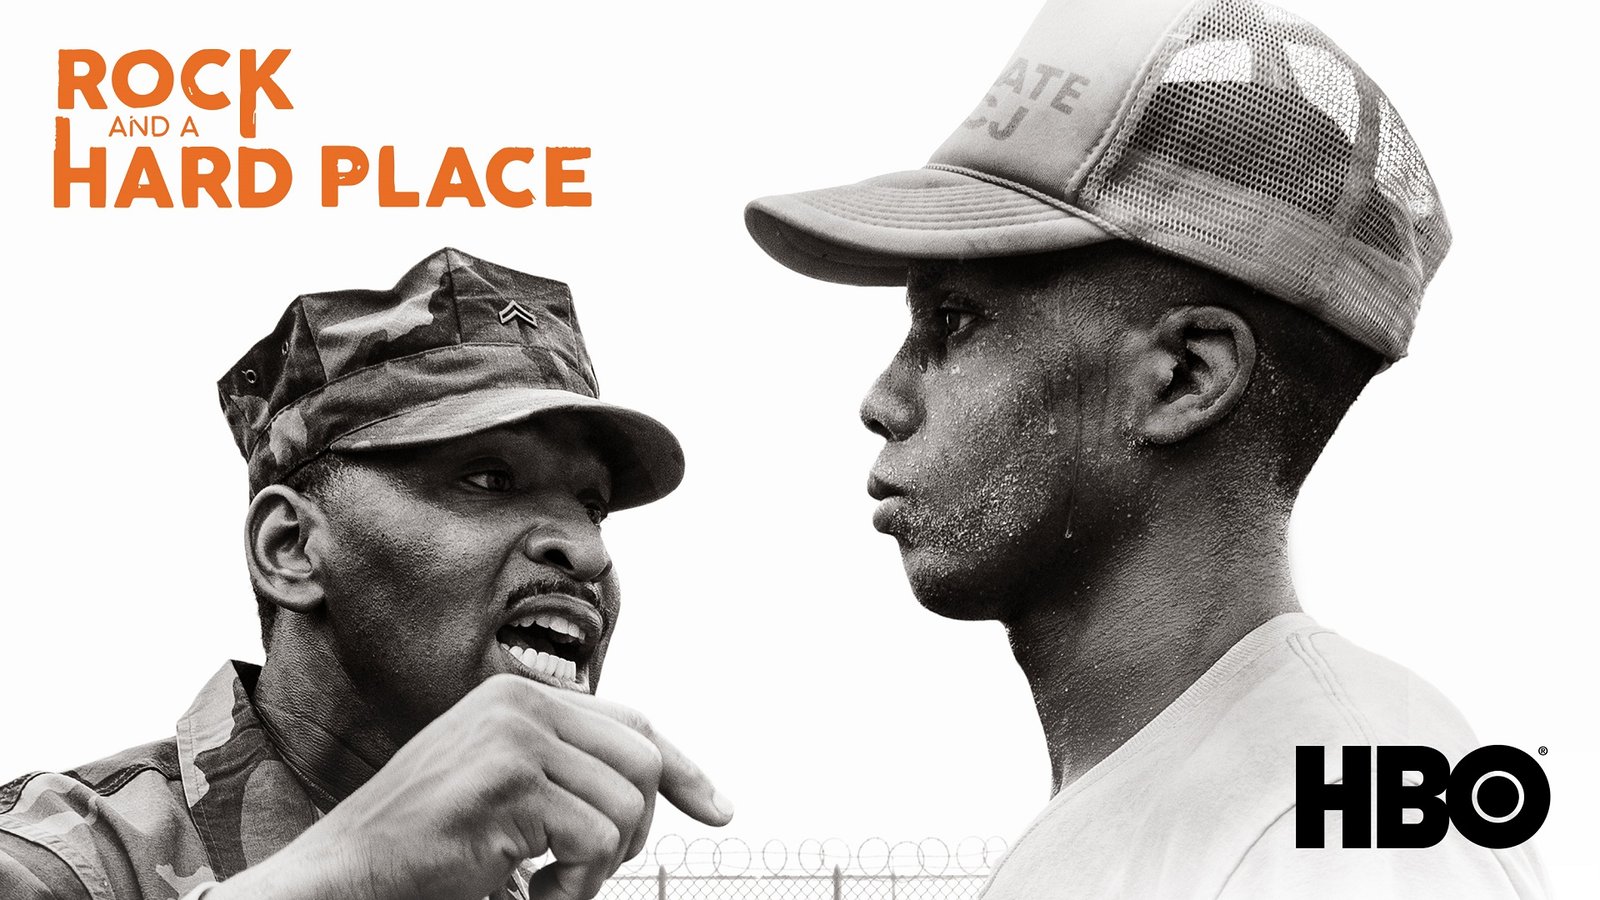 Rock and a Hard Place - A Boot Camp Program Granting Incarcerated Young Men a Second Chance